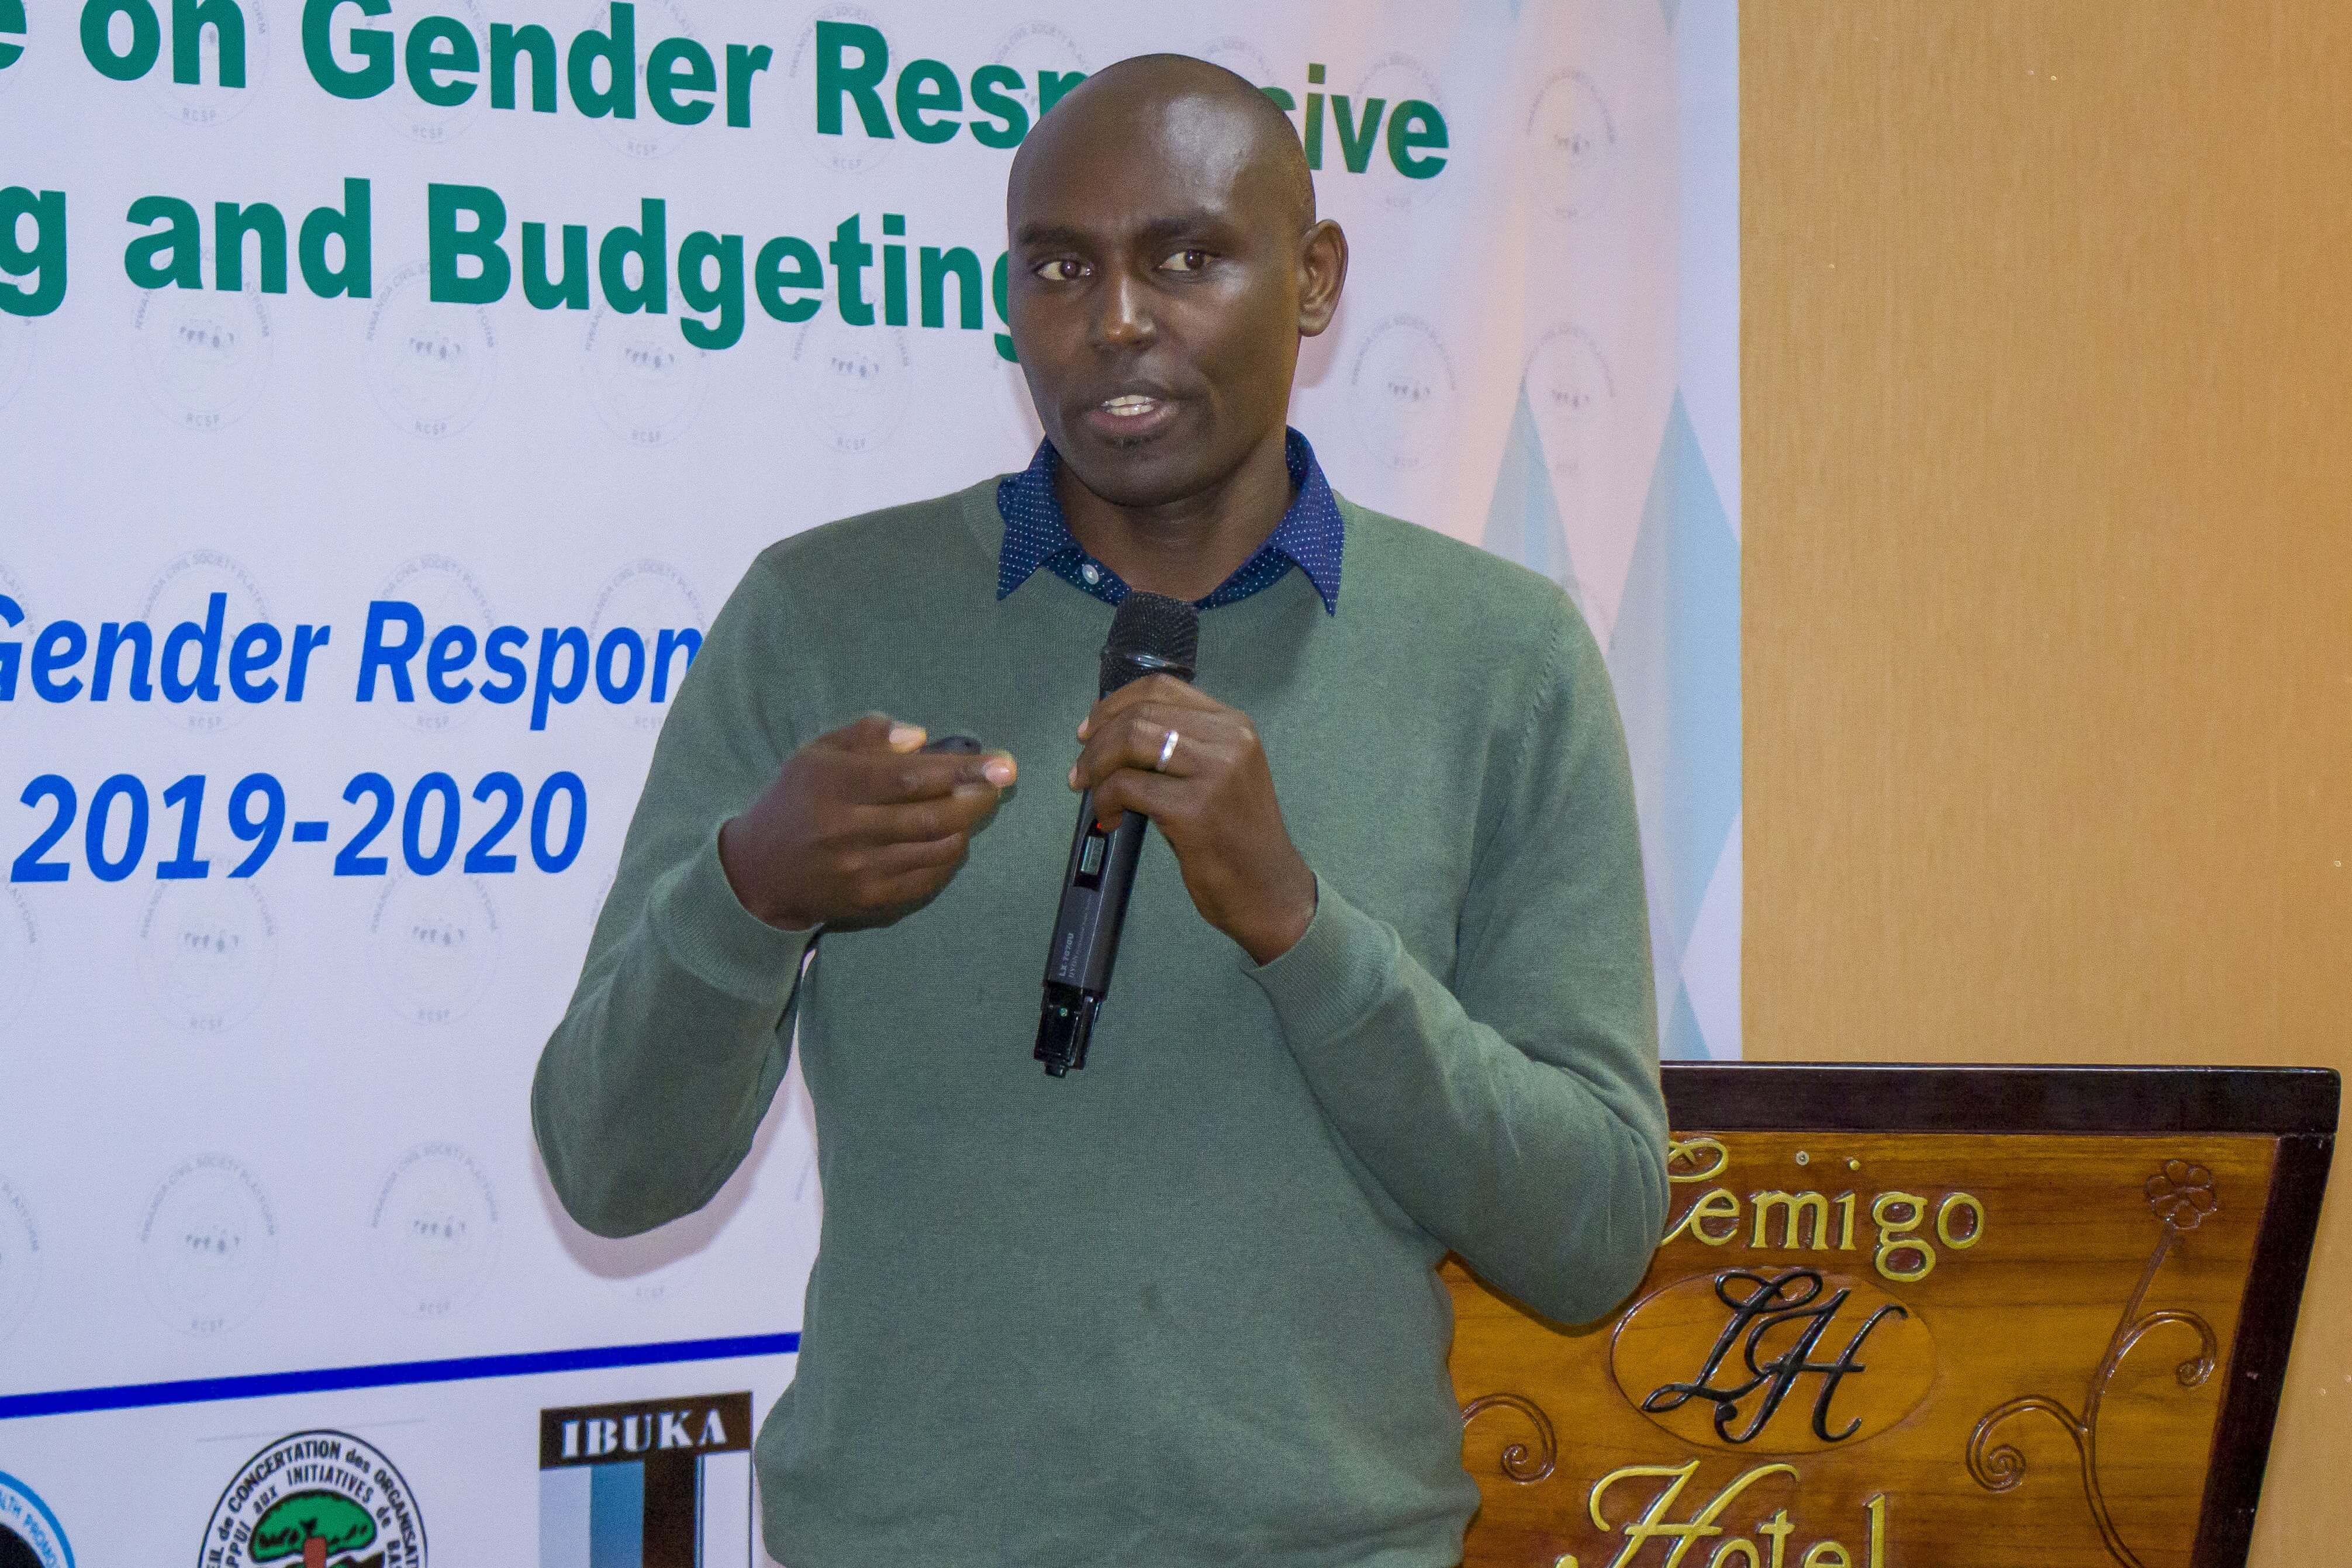 Johnson Rukundo, a researcher presenting findings of a study on gender-responsive budgeting